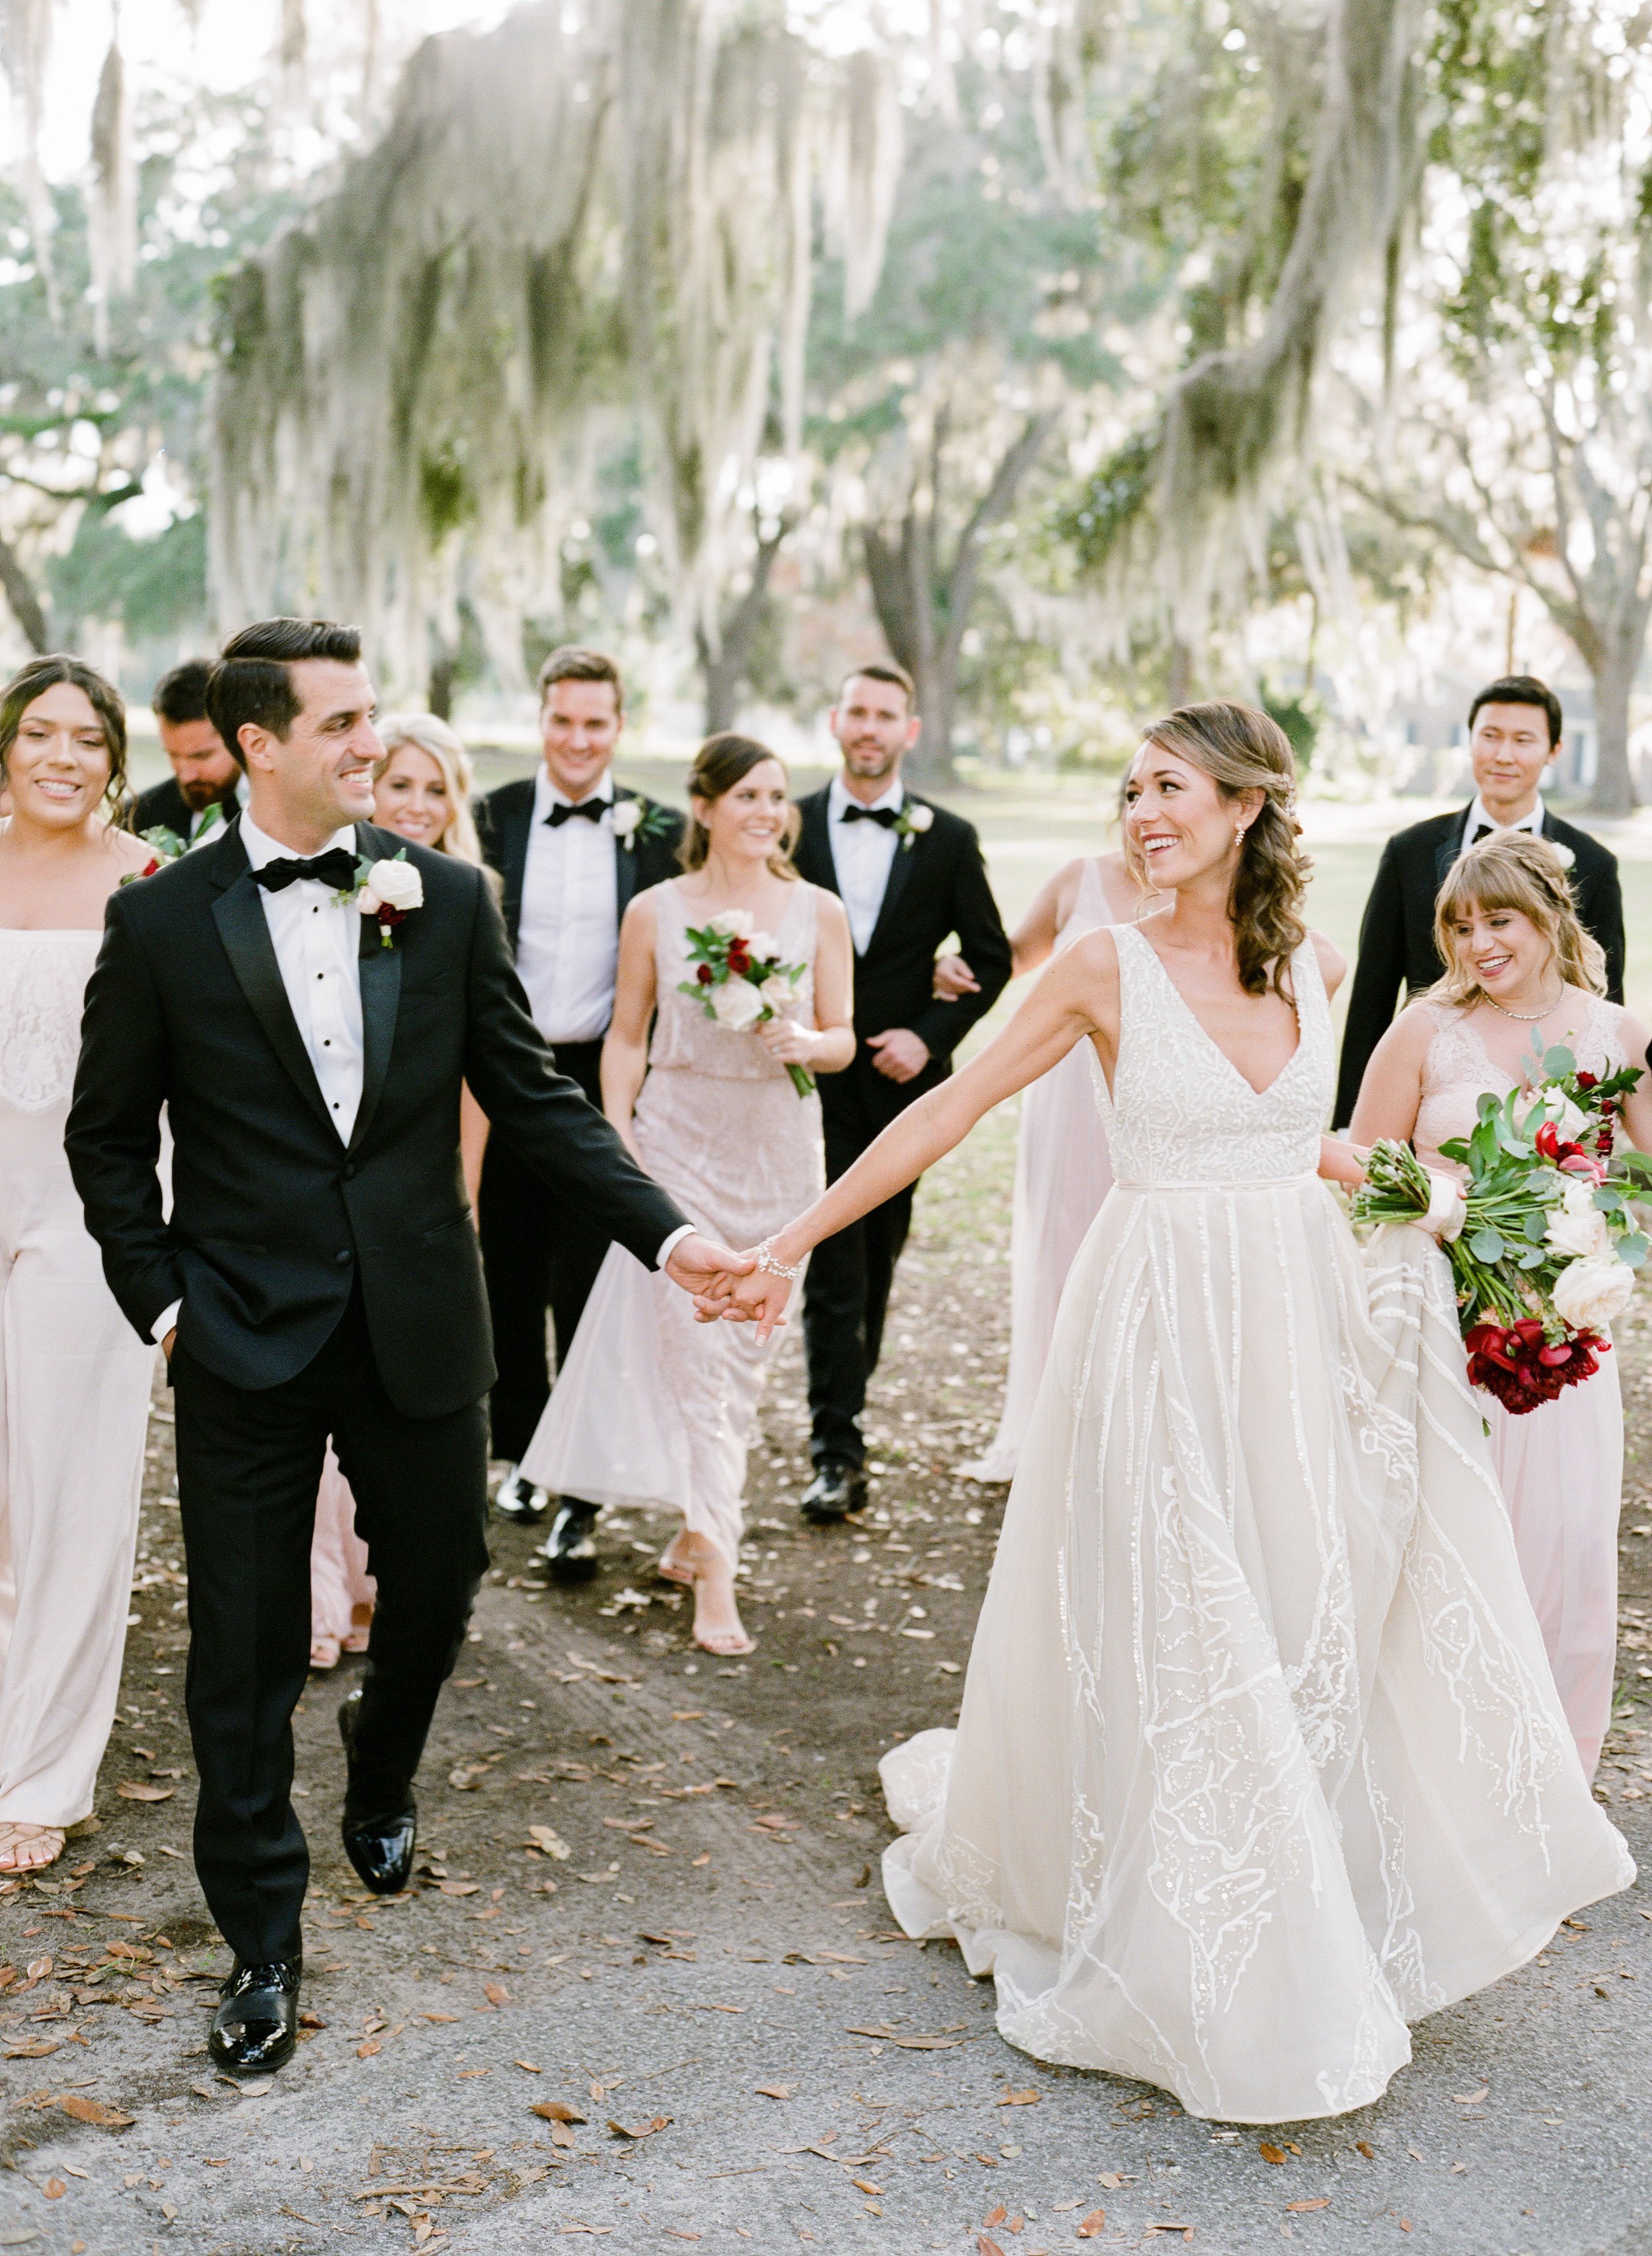 ivory-and-beau-bridal-boutique-savannah-wedding-planner-the-happy-bloom-photography-bethesda-academy-wedding-morris-center-wedding-savannah-wedding-14.jpg